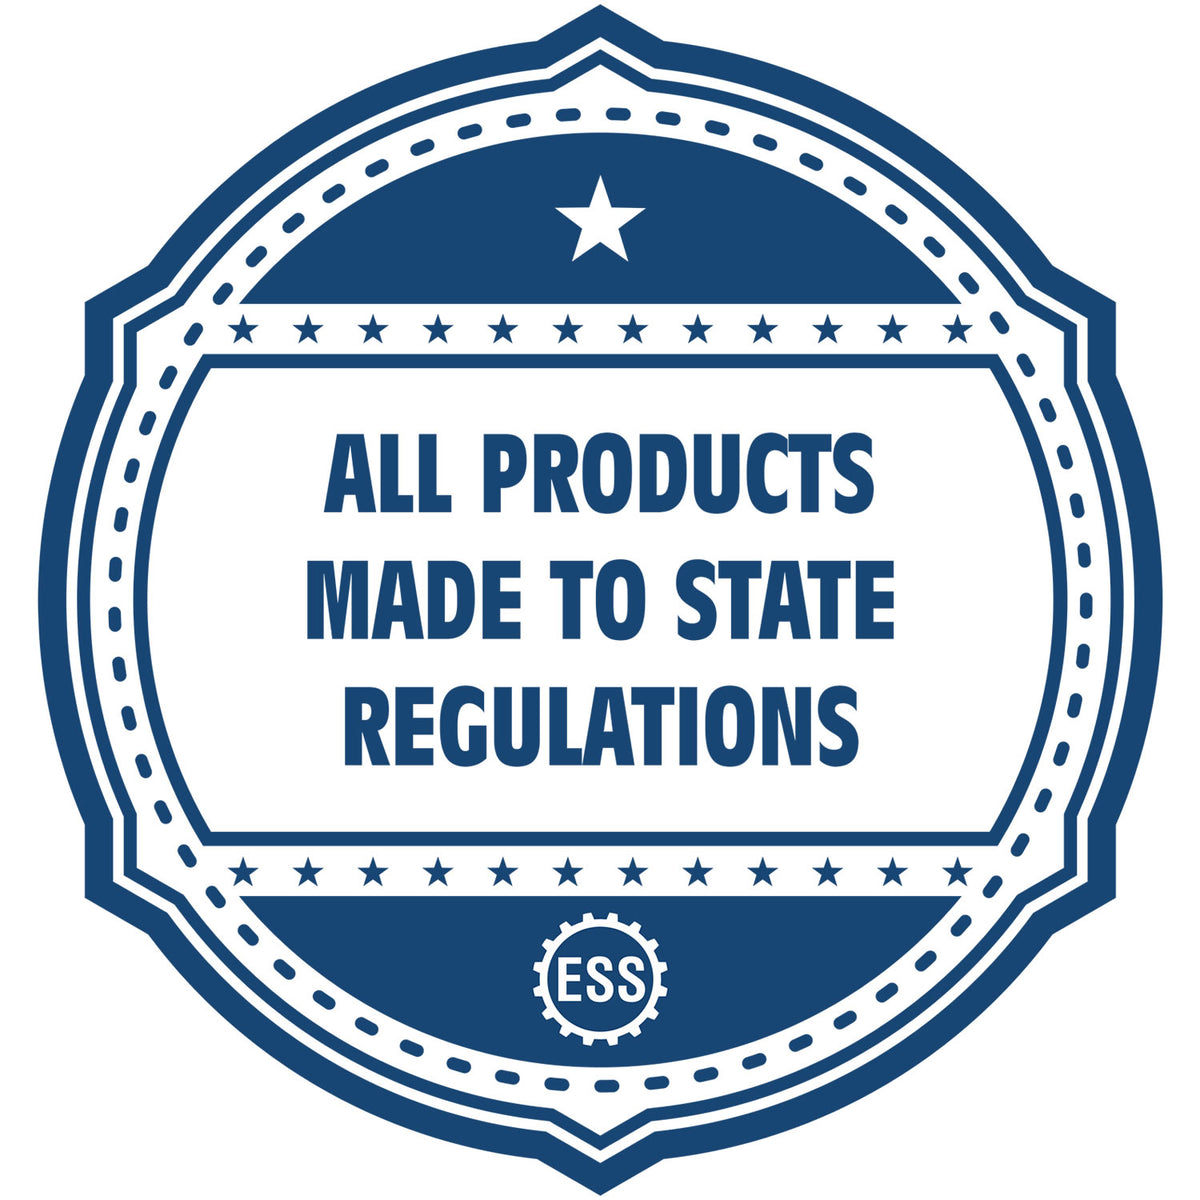 An icon or badge element for the Premium MaxLight Pre-Inked Nebraska Engineering Stamp showing that this product is made in compliance with state regulations.